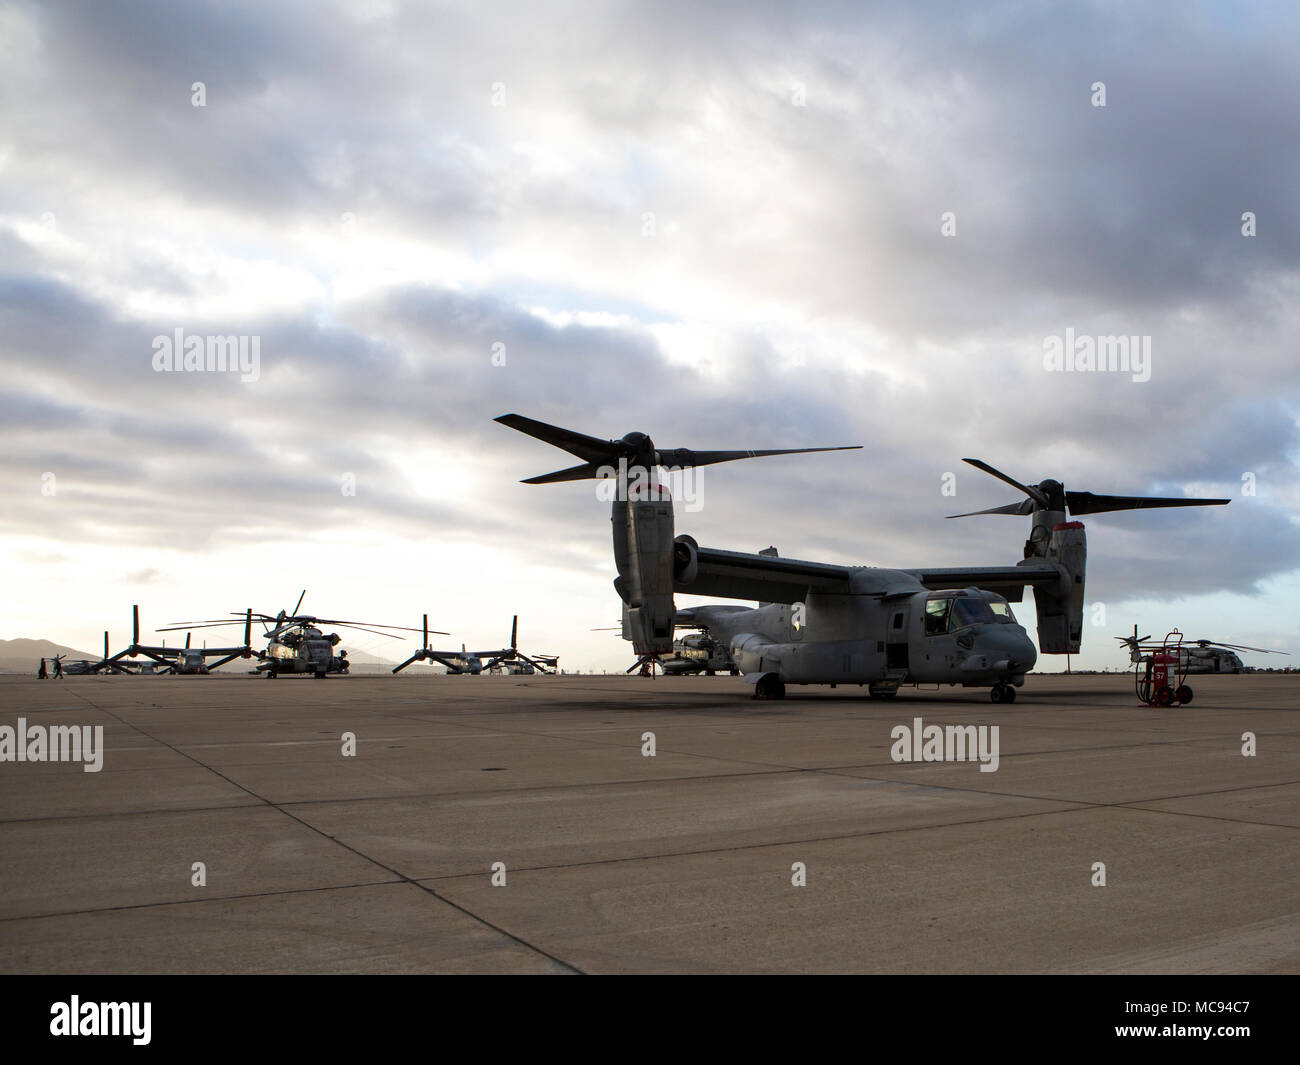 An MV-22B Osprey assigned to Marine Medium Tiltrotor Squadron (VMM) 166 (Reinforced), Marine Aircraft Group 16, 3rd Marine Aircraft Wing, rests on the flight line during sunrise at Marine Corps Air Station Miramar, Calif., April 12. Marine Heavy Helicopter Squadron (HMH) 361, Marine Light Attack Helicopter Squadron (HMLA) 469 and VMM-166 consolidated to become VMM-166 (Rein) for an upcoming combat deployment with the 13th Marine Expeditionary Unit. MCAS Miramar is home to 3rd MAW and 19 of its squadrons. (U.S. Marine Corps photo by Cpl. Becky Calhoun/Released) Stock Photo